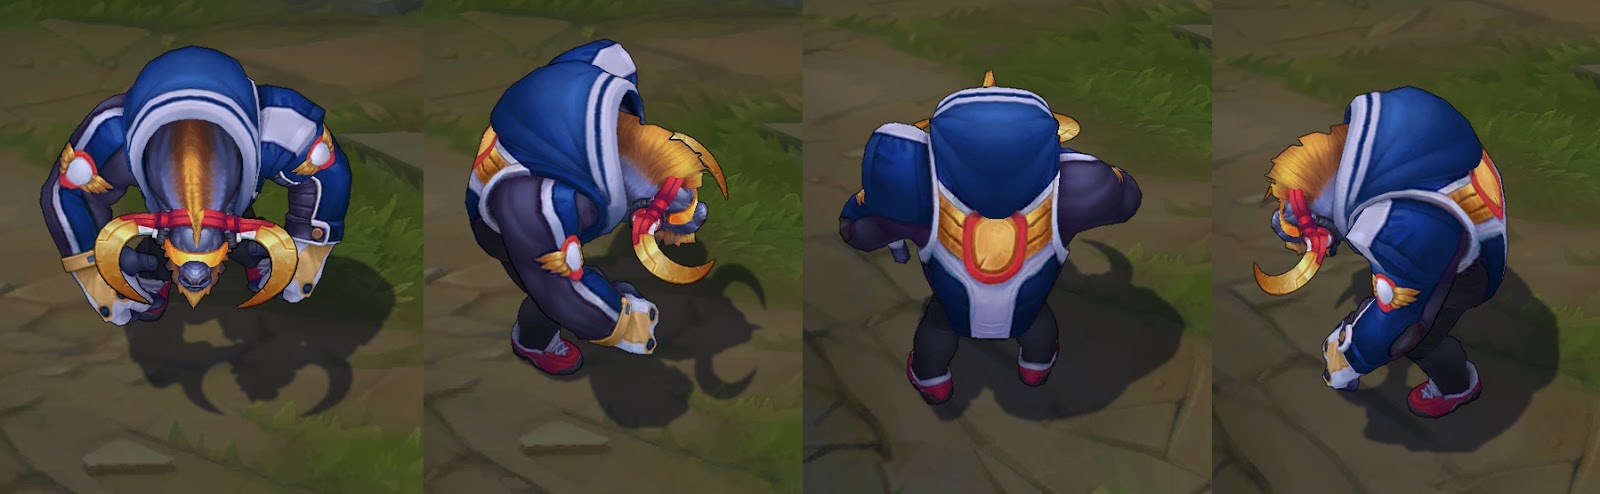 SKT T1 Alistar Skin for league of legends ingame picture